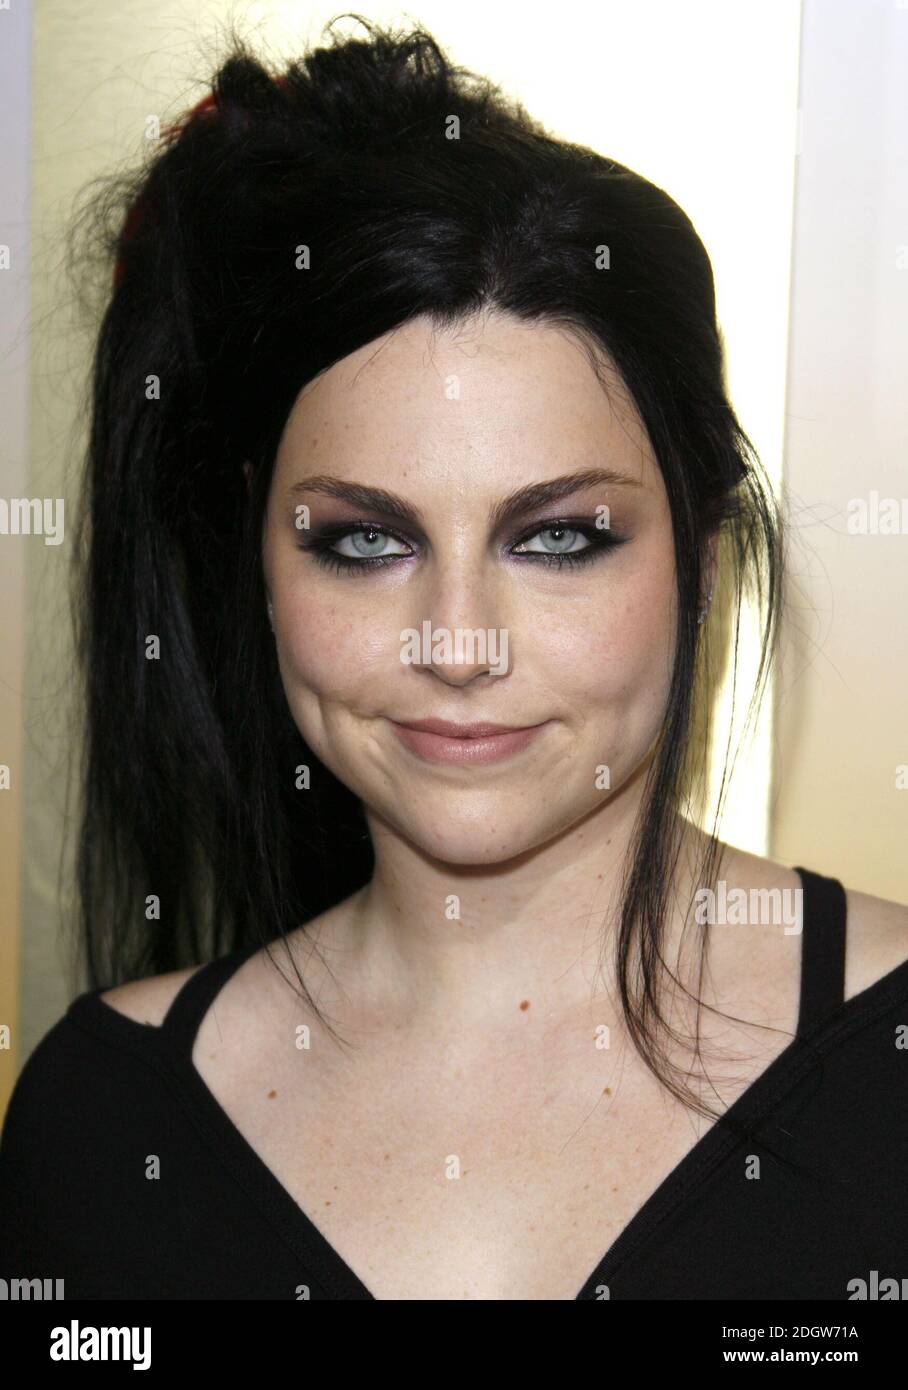 Amy Lee arriving at the the MTV Video Music Awards 2006, Radio City, New  York. Doug Peters/EMPICS Entertainment Stock Photo - Alamy